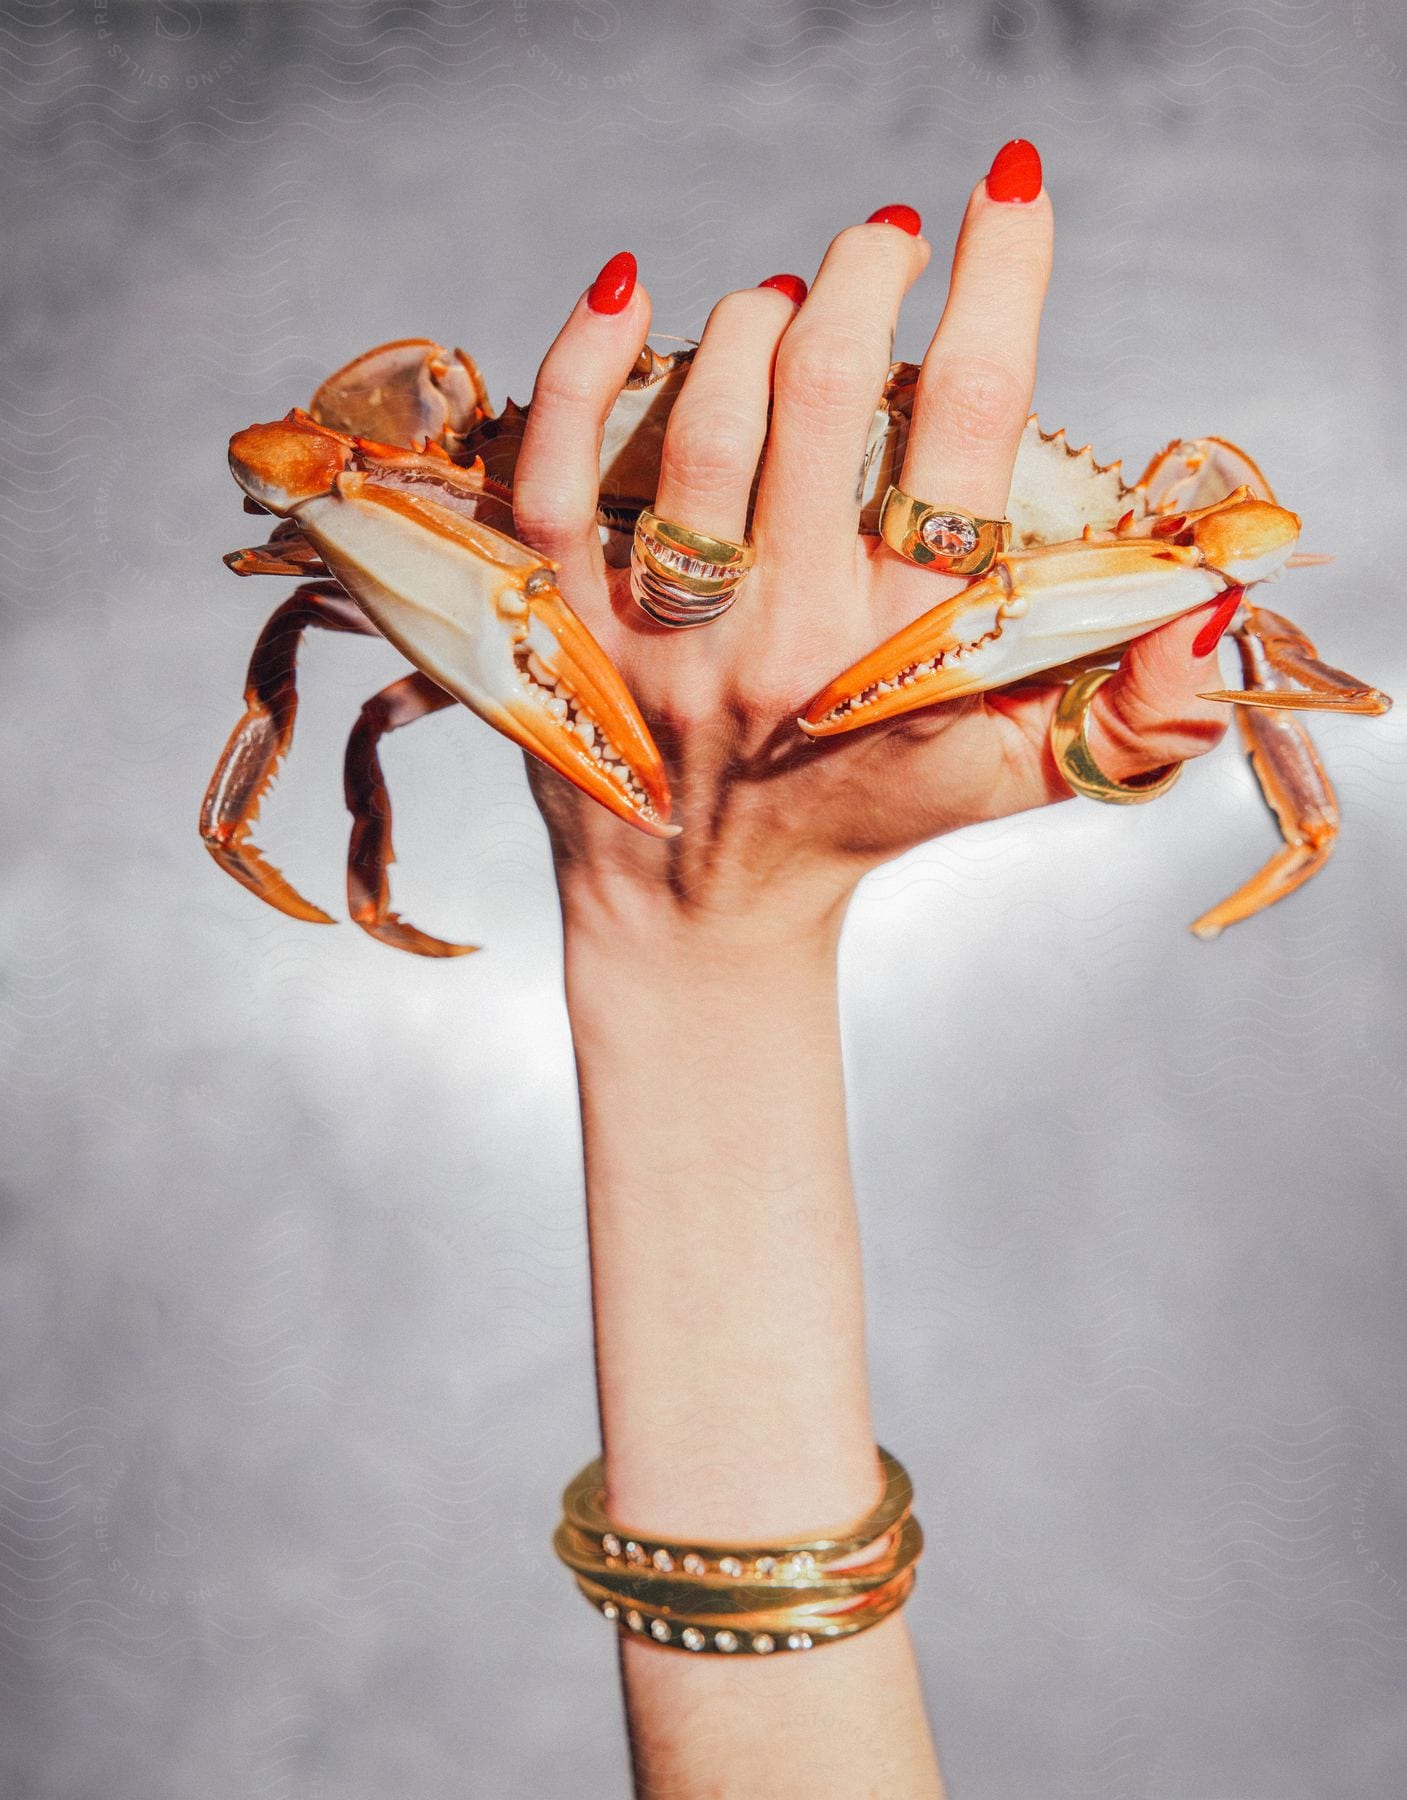 A woman's hand with rings and bracelets holds a cooked crab.